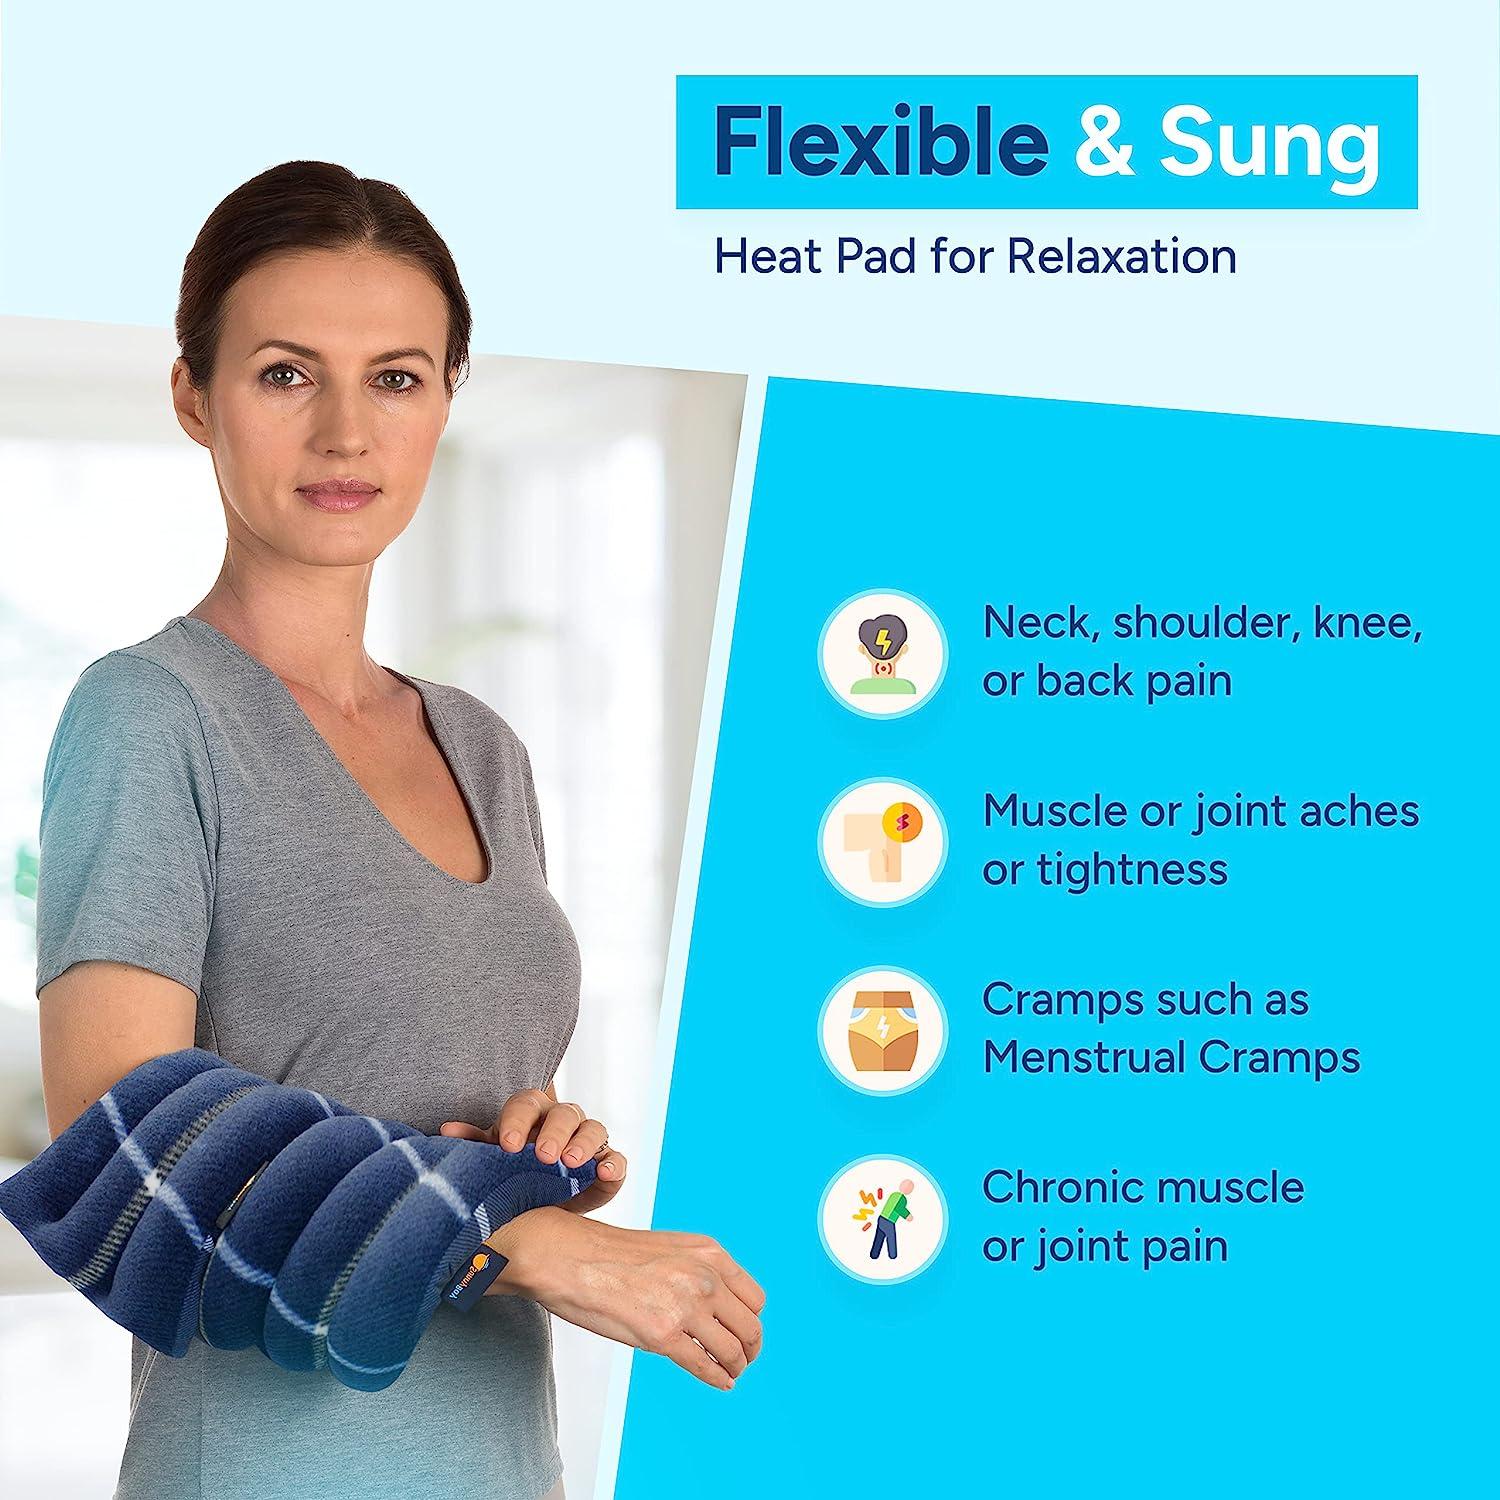 SunnyBay Microwave Heating Pad, Microwavable Heated Neck Pillow for Moist  Hot or Cold Therapy, Aromatherapy Heated Neck and Shoulder Wrap with